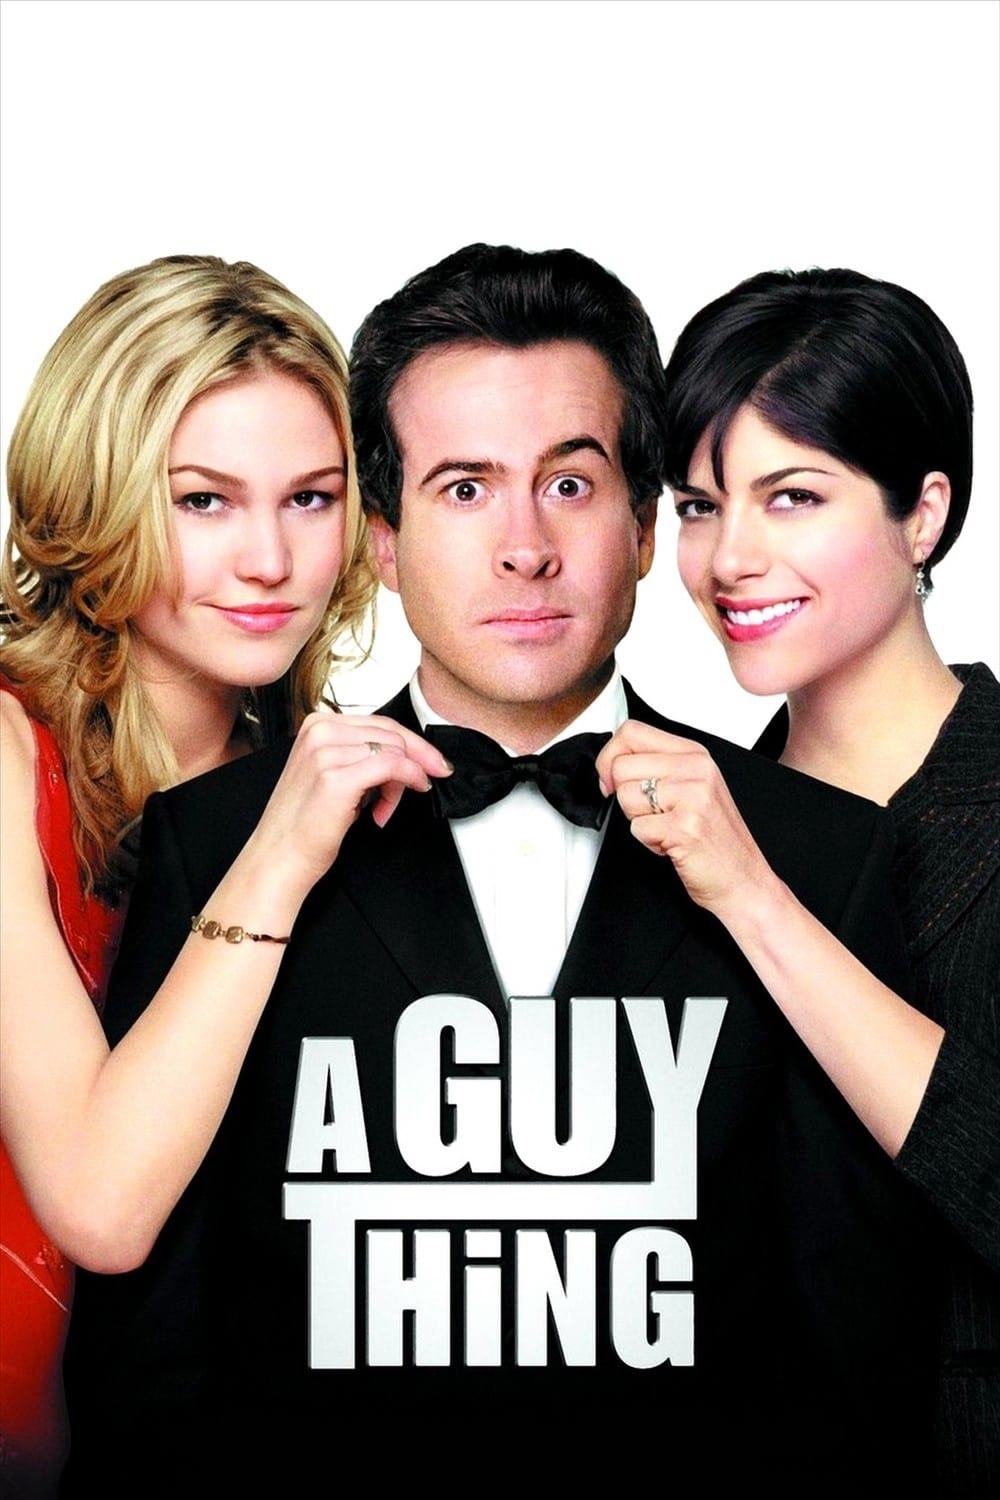 A Guy Thing (2003)